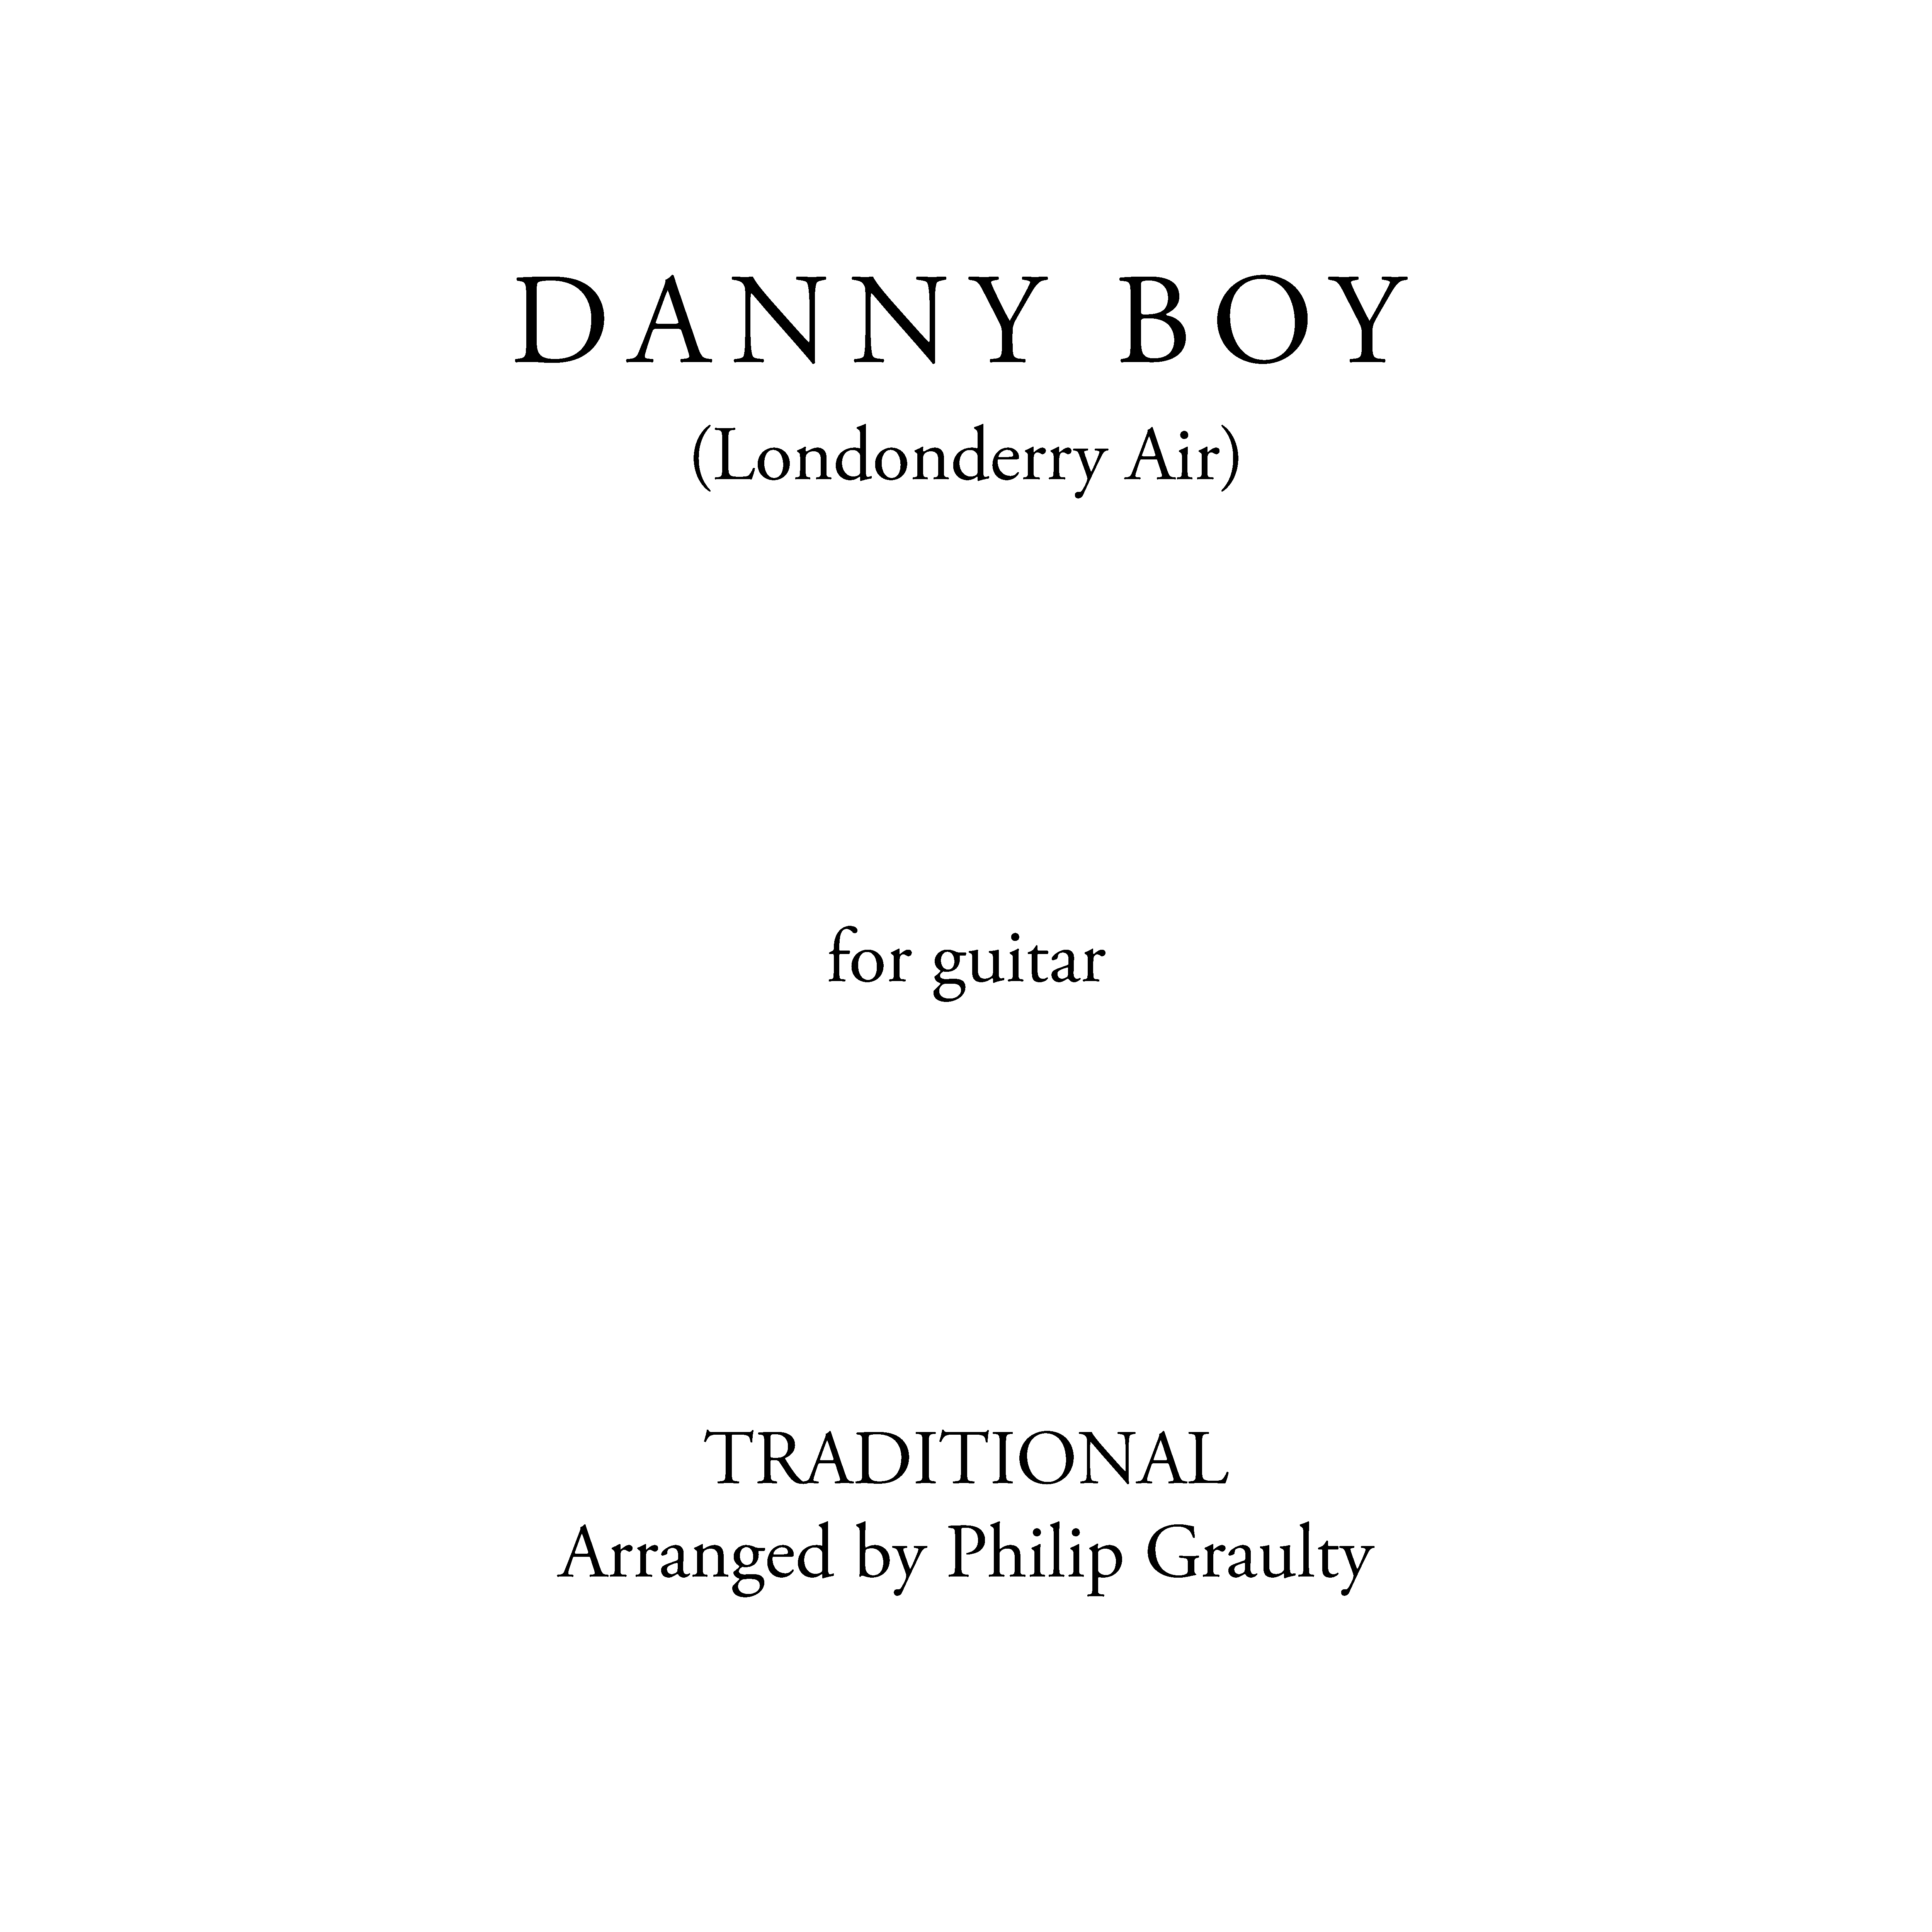 The title page to the score of Danny Boy.